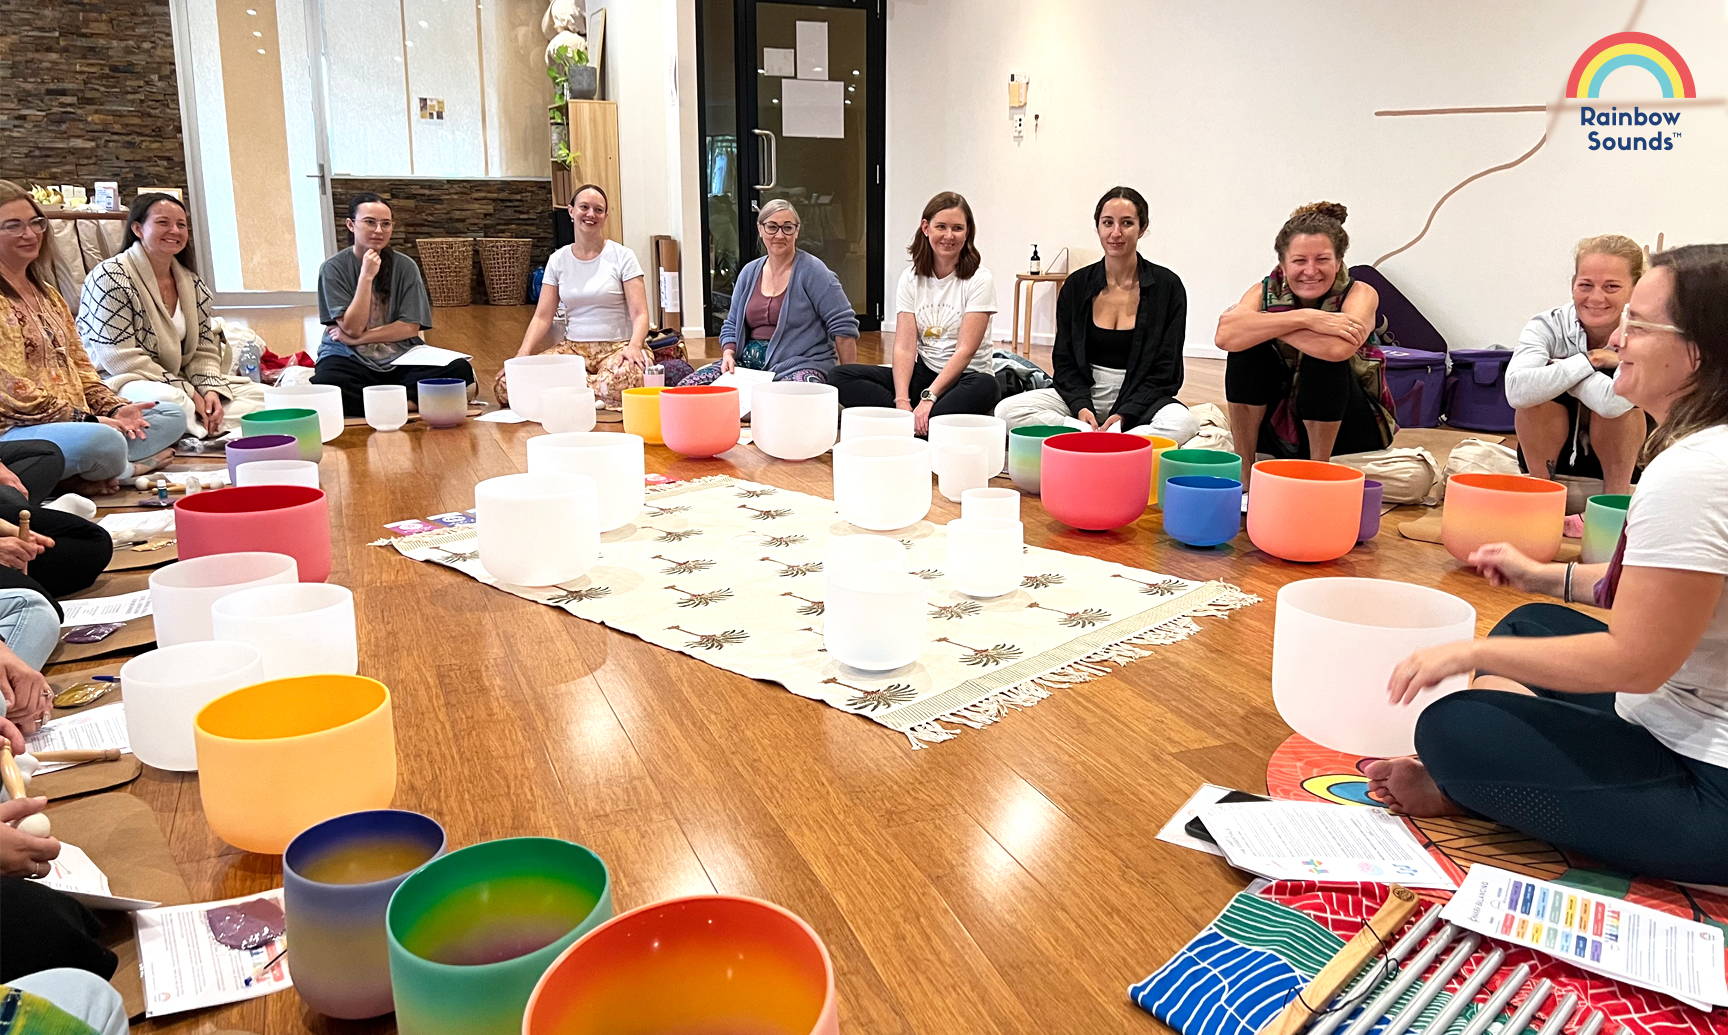 Rainbow Sounds Crystal Singing Bowls Workshop coming to Sunshine Coast in September 2022